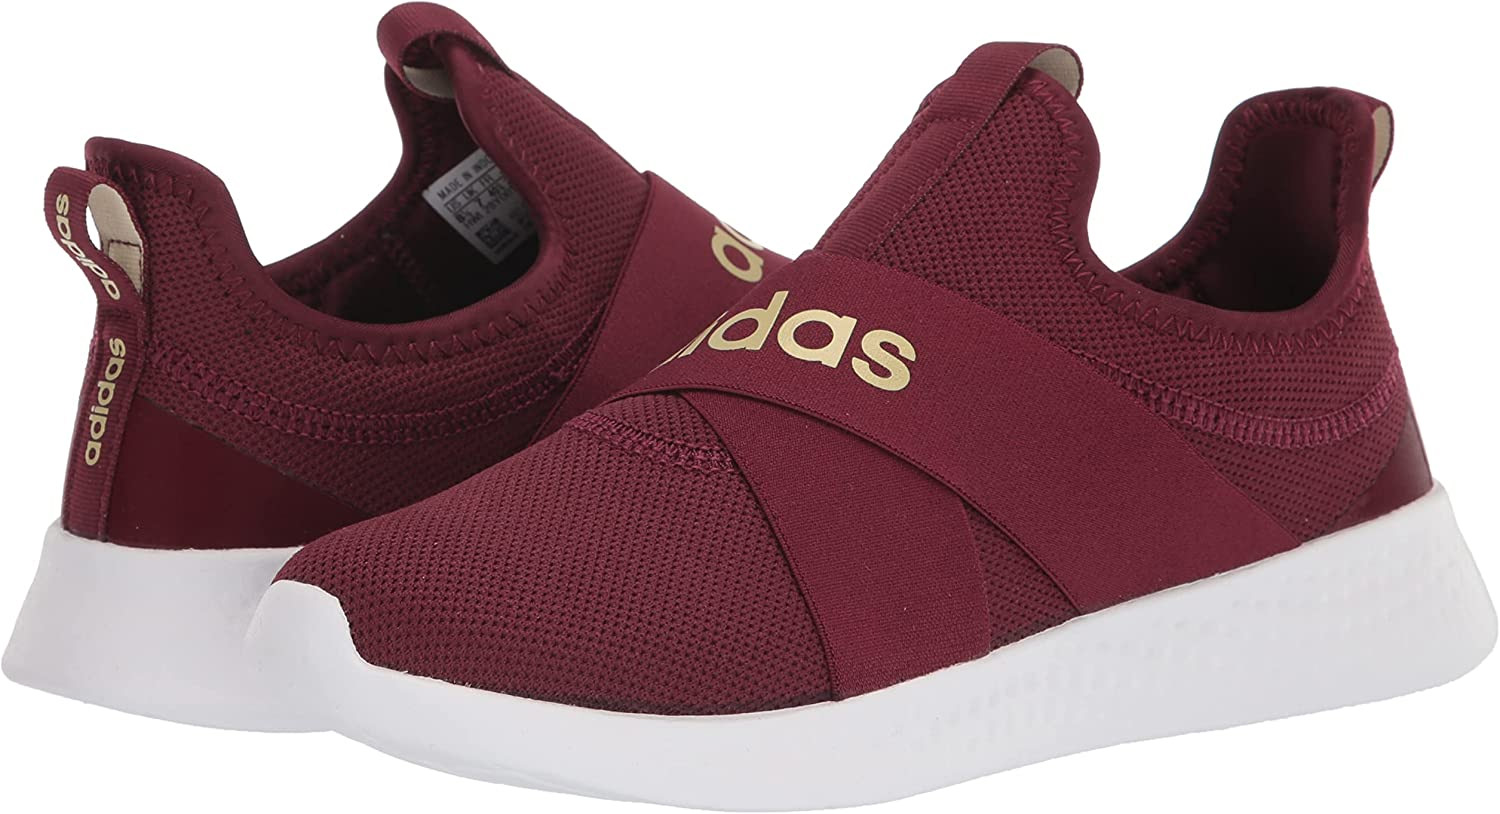 Adidas Women's Puremotion-Adapt step in sneakers